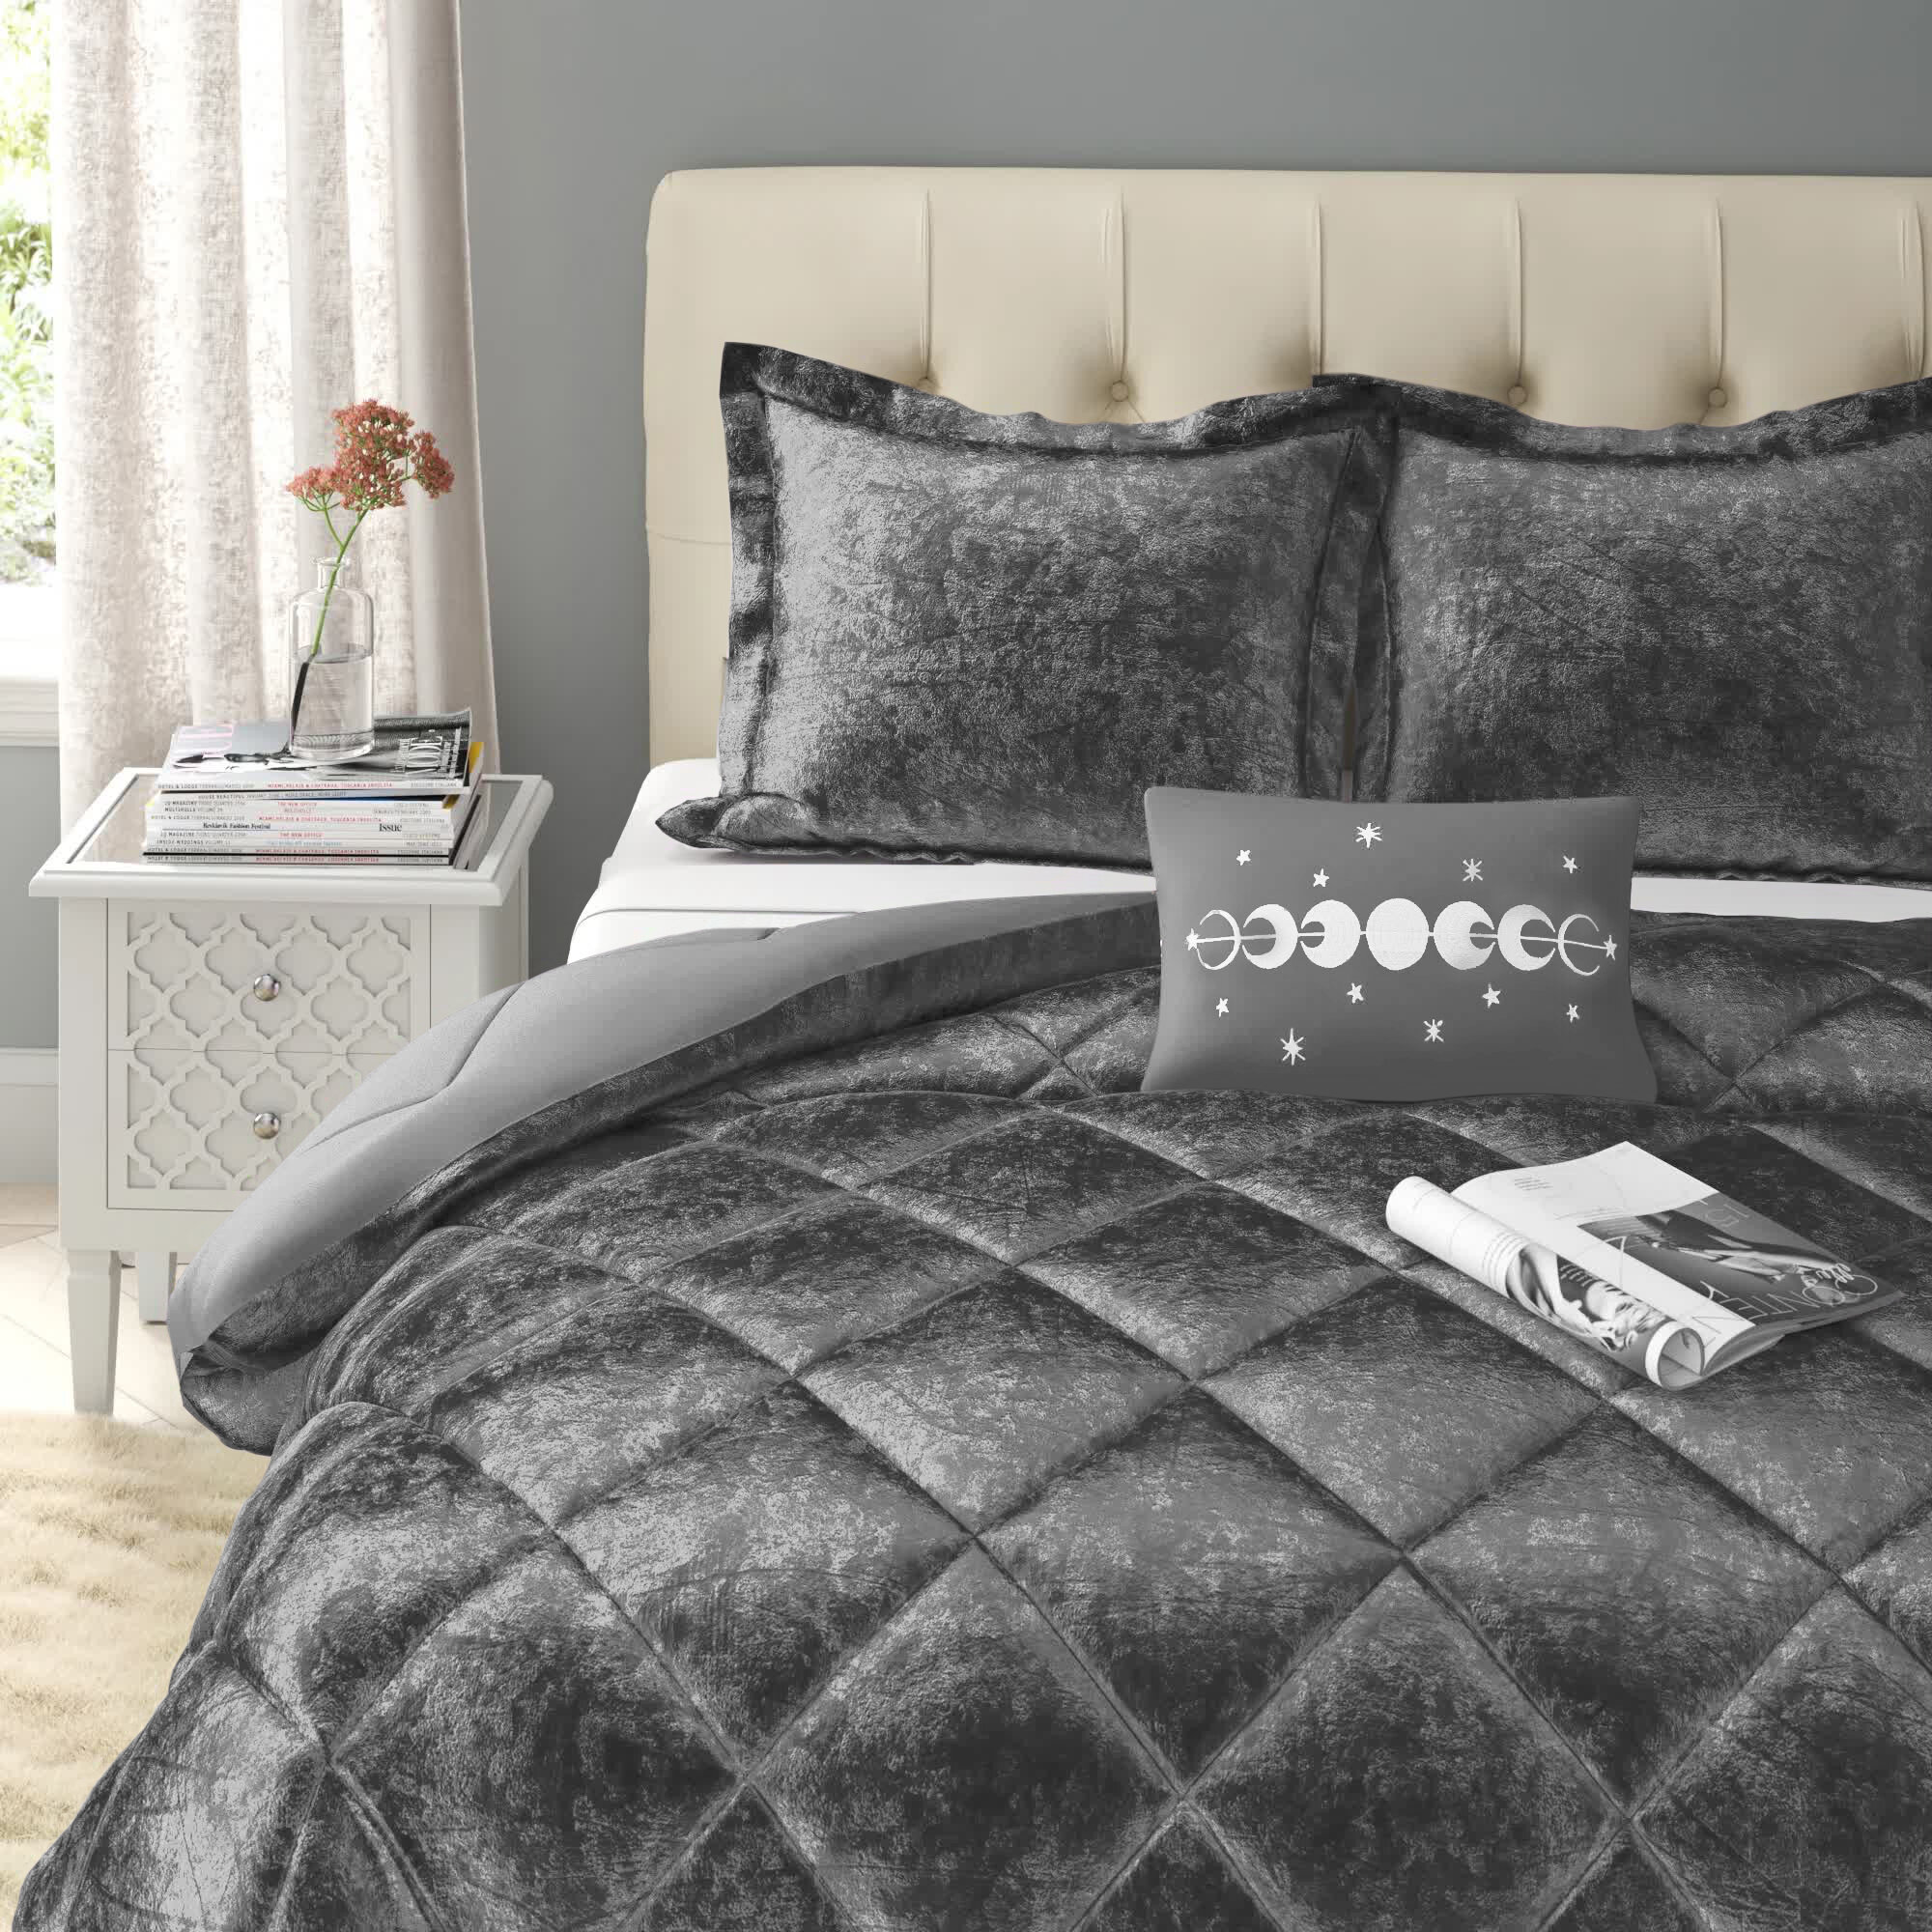 Synthia Diamond Textured Woven Throw in Grey buy online from the